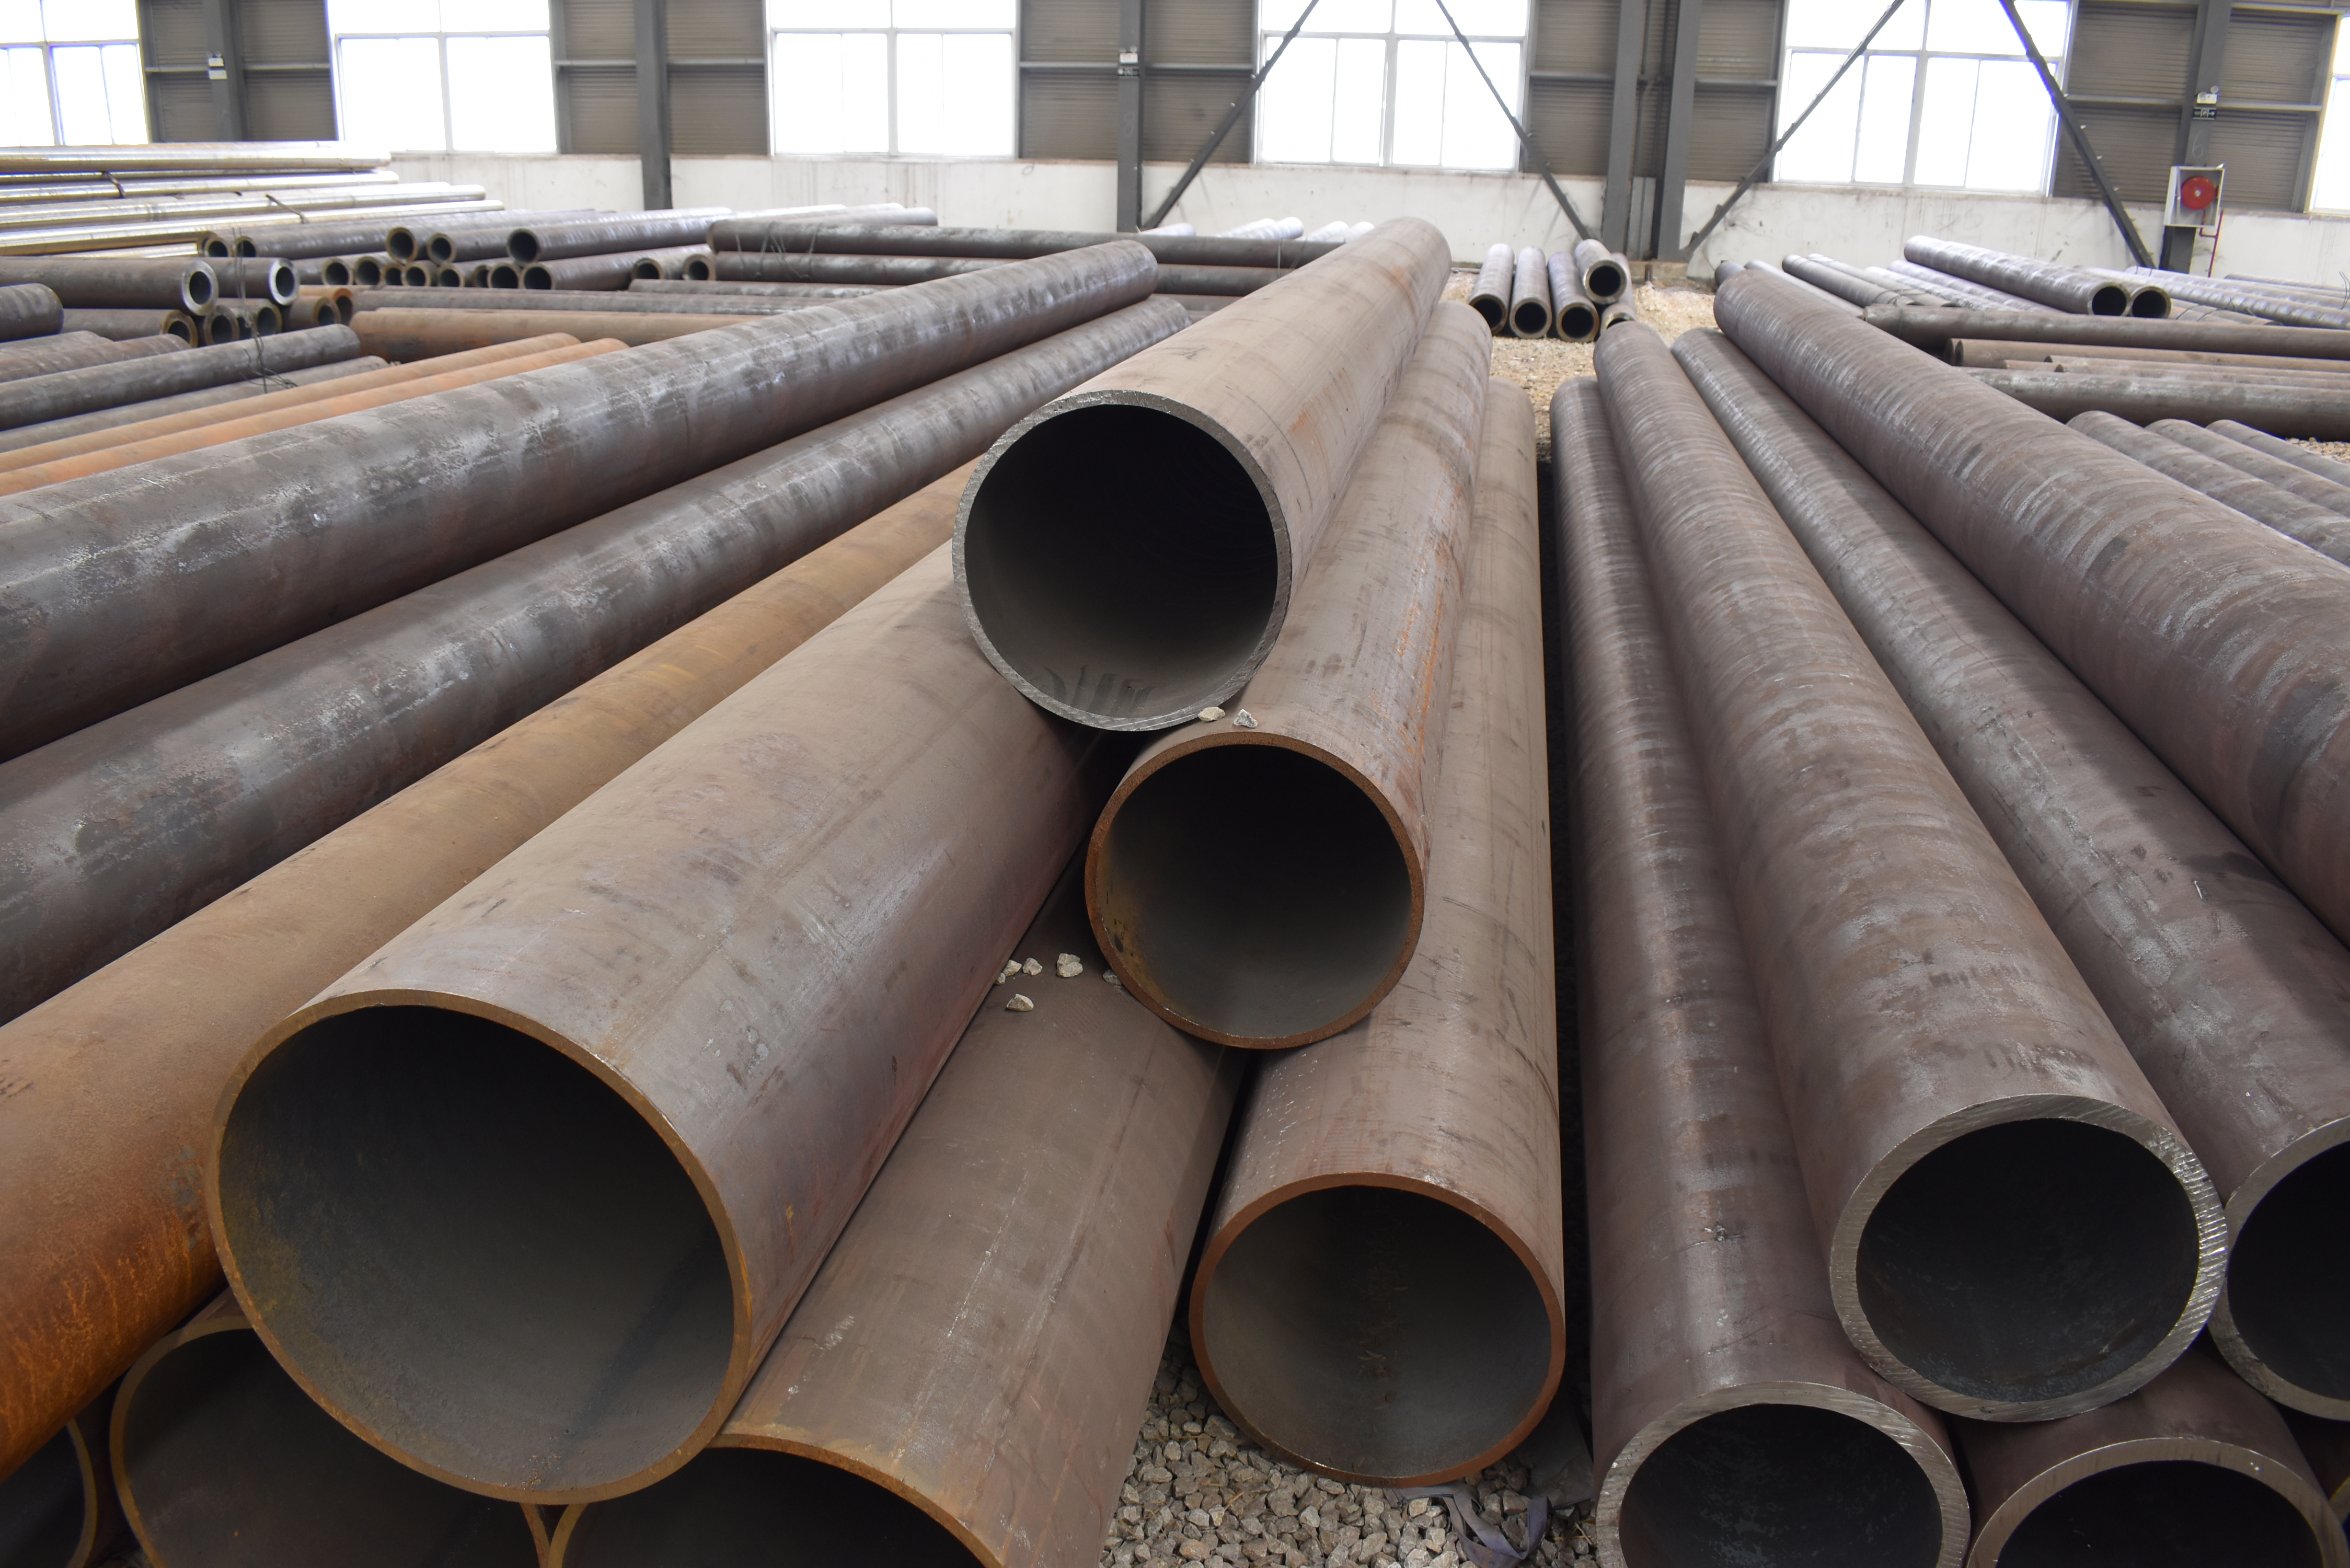 Export High Quality Carbon Steel Round Pipe/Tube Low Carbon Steel Pipe with Cheap Price